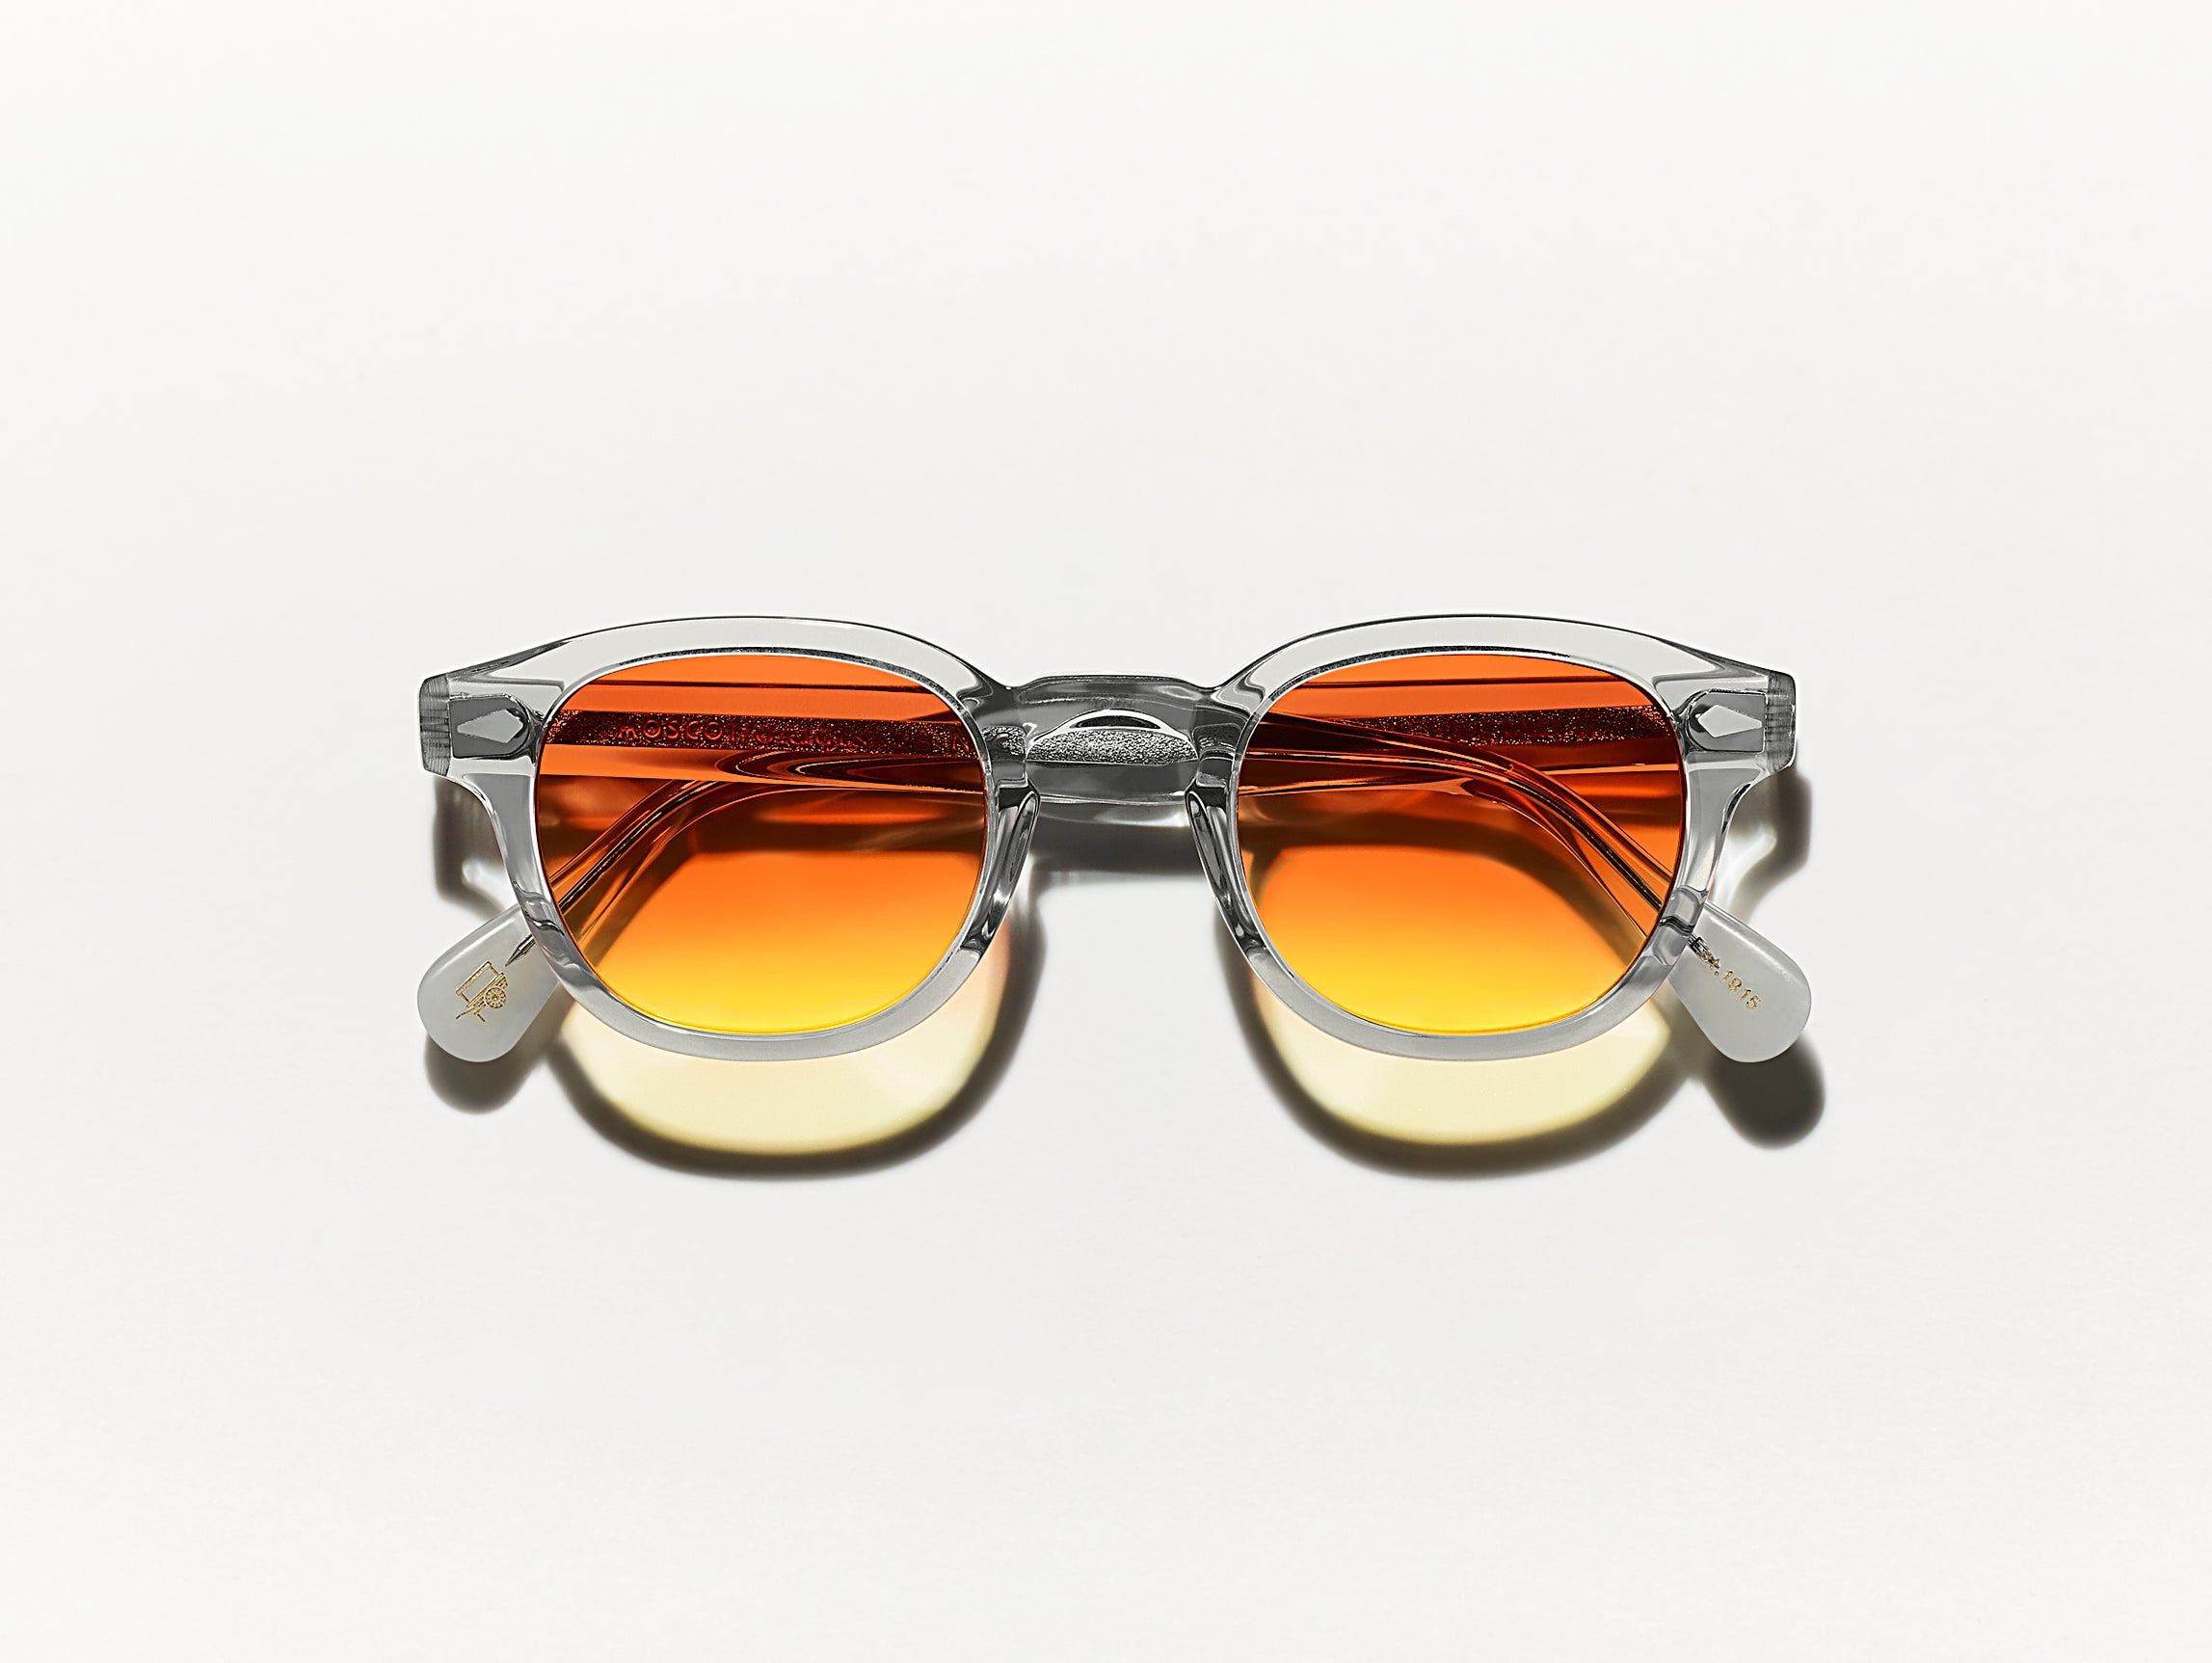 The LEMTOSH Light Grey with Candy Corn Tinted Lenses